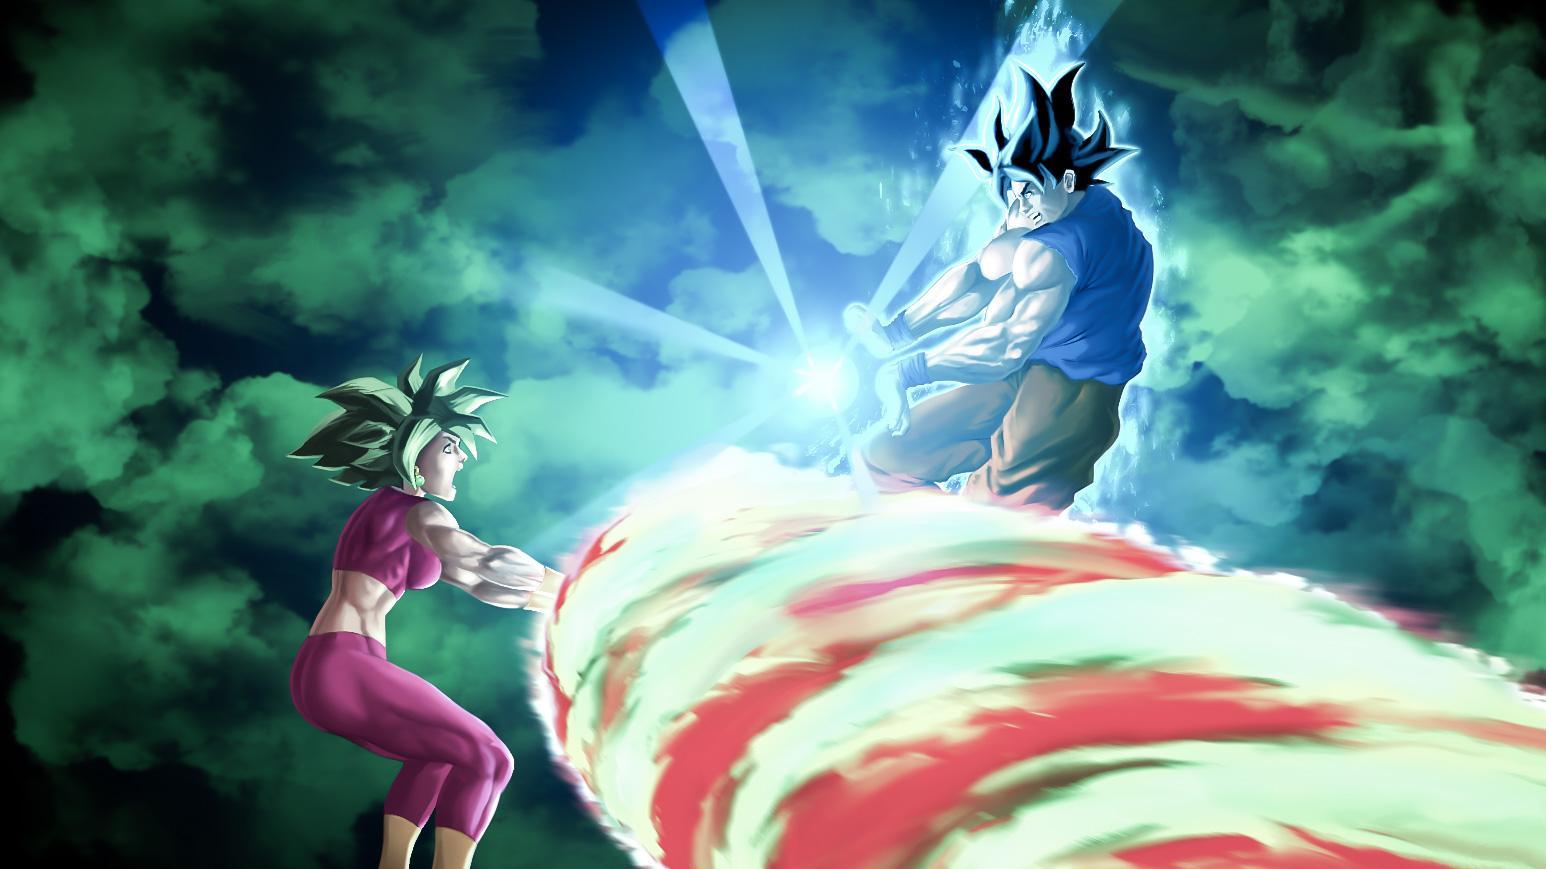 My drawing of UI Goku vs Kefla! Used the split second before his